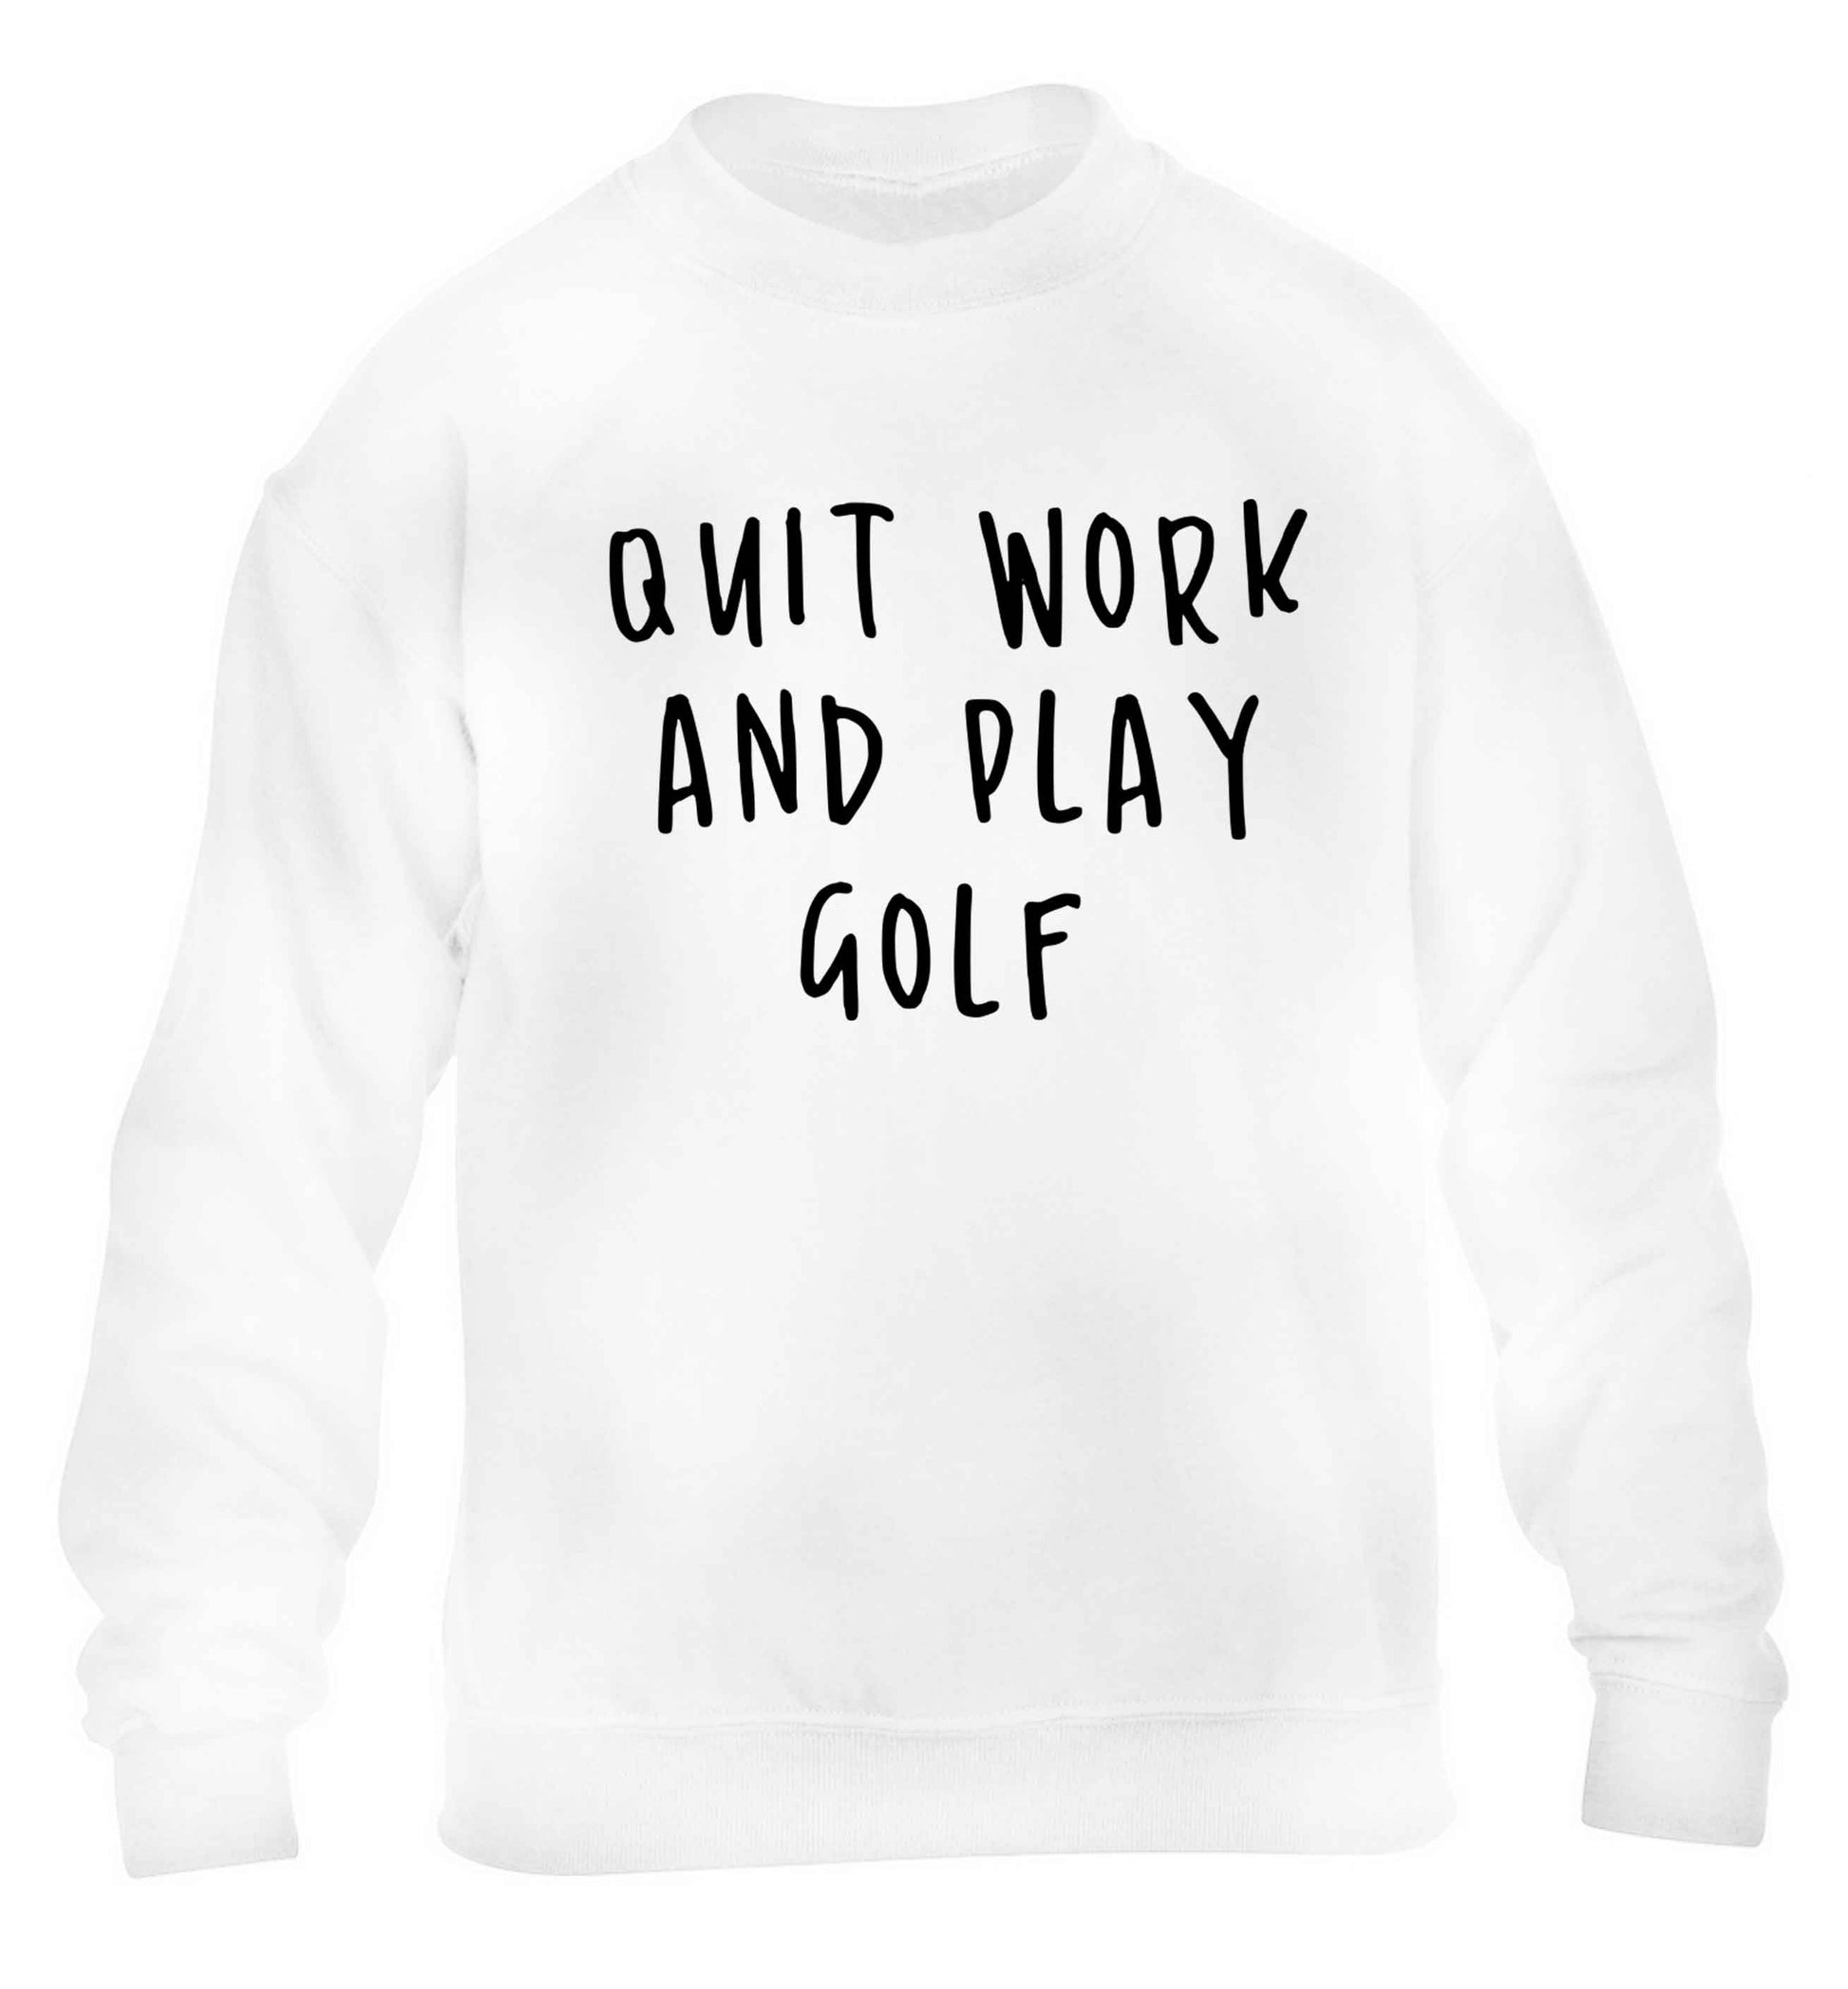 Quit work and play golf children's white sweater 12-13 Years